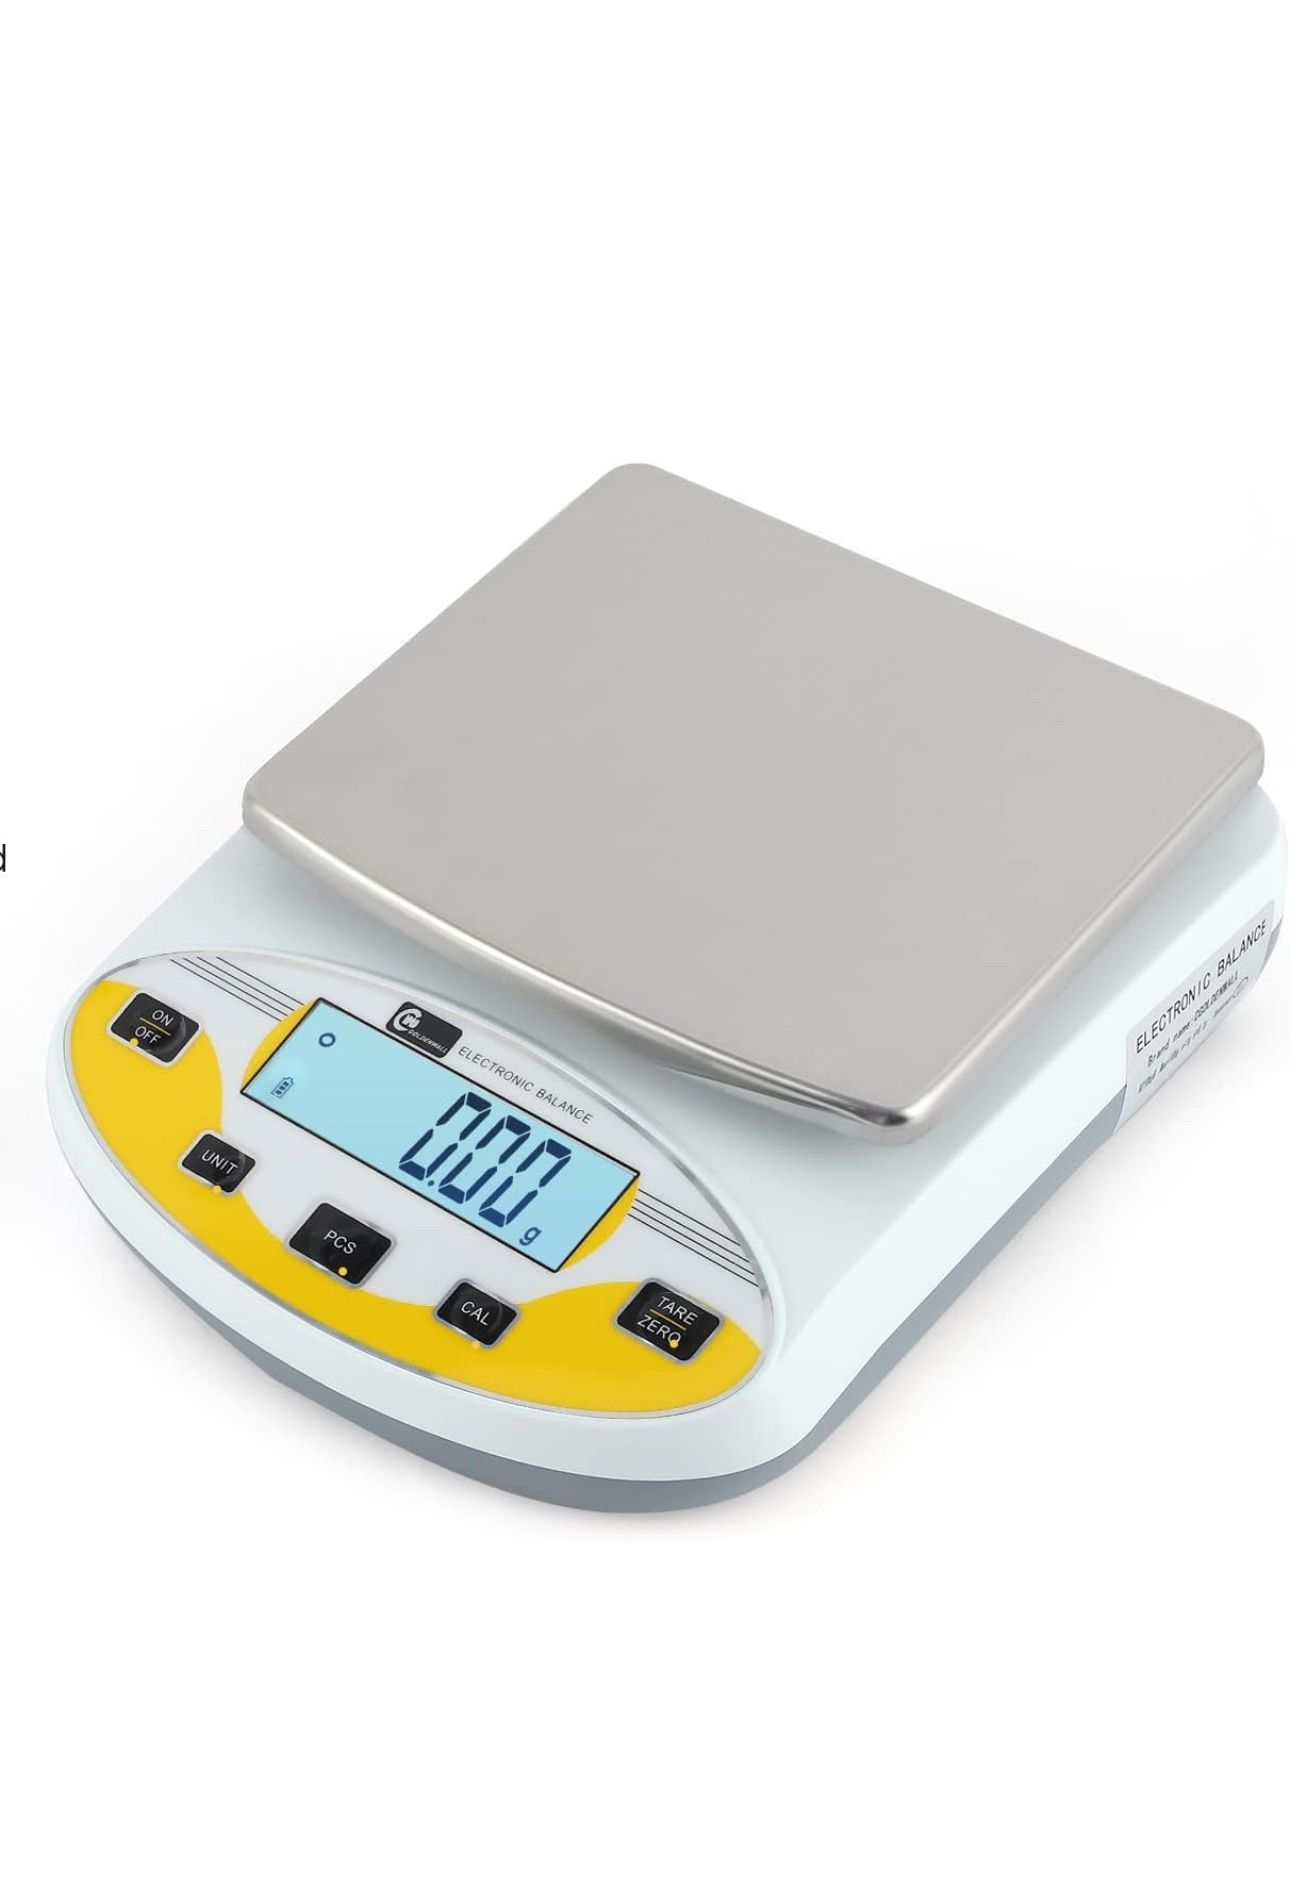 CGOLDENWALL Precision Lab Scale 5000gX0.01g Analytical Electronic Balance Digital Laboratory Scale Precision Jewelry Scales Kitchen Weighing Electroni